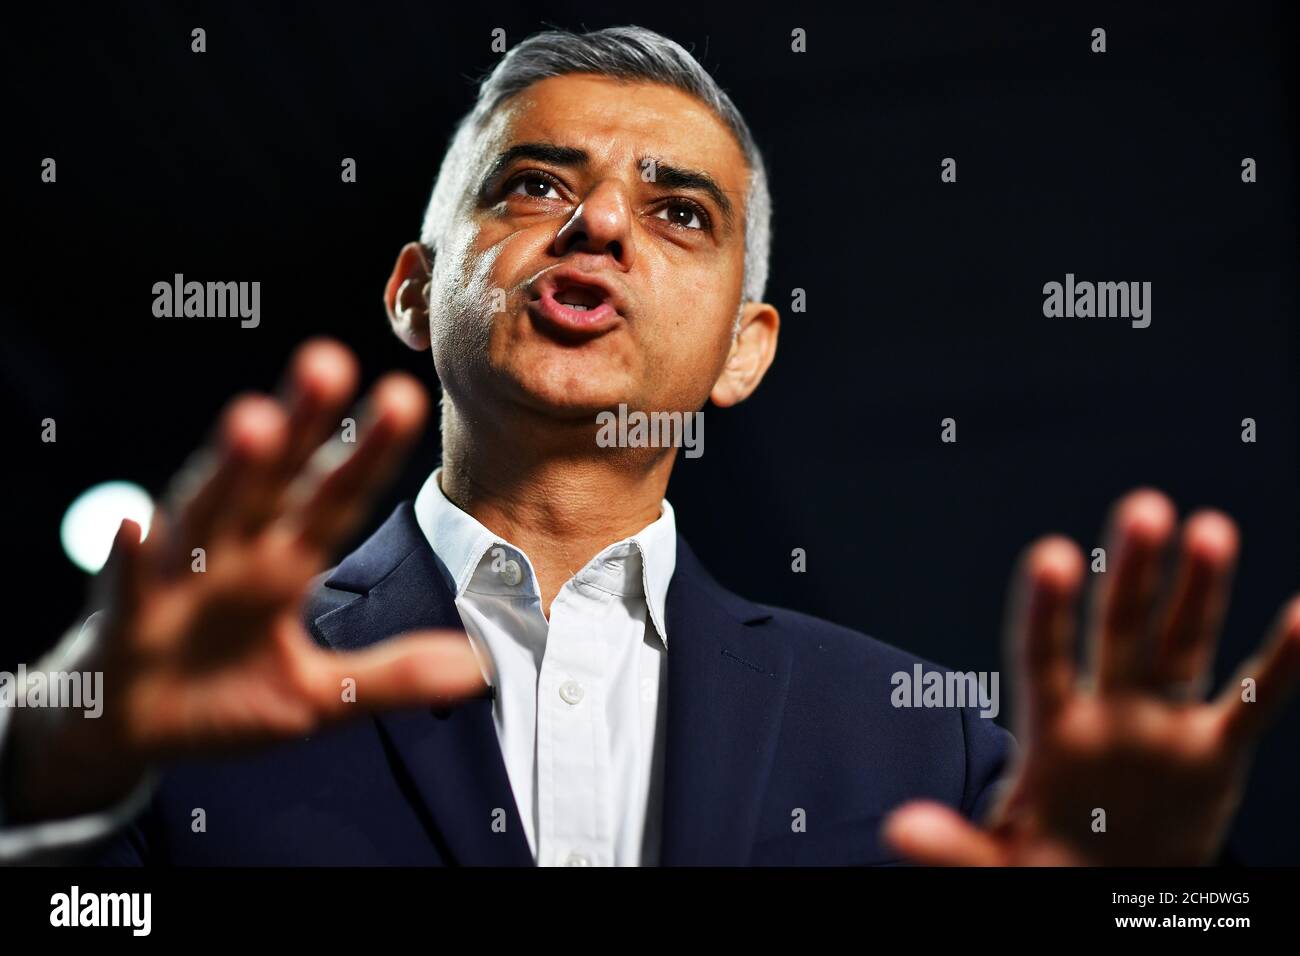 Mayor of London Sadiq Khan speaks during an interview with Reuters at an event to promote the start of London Tech Week, in London, Britain, June 10, 2019.  REUTERS/Dylan Martinez Stock Photo